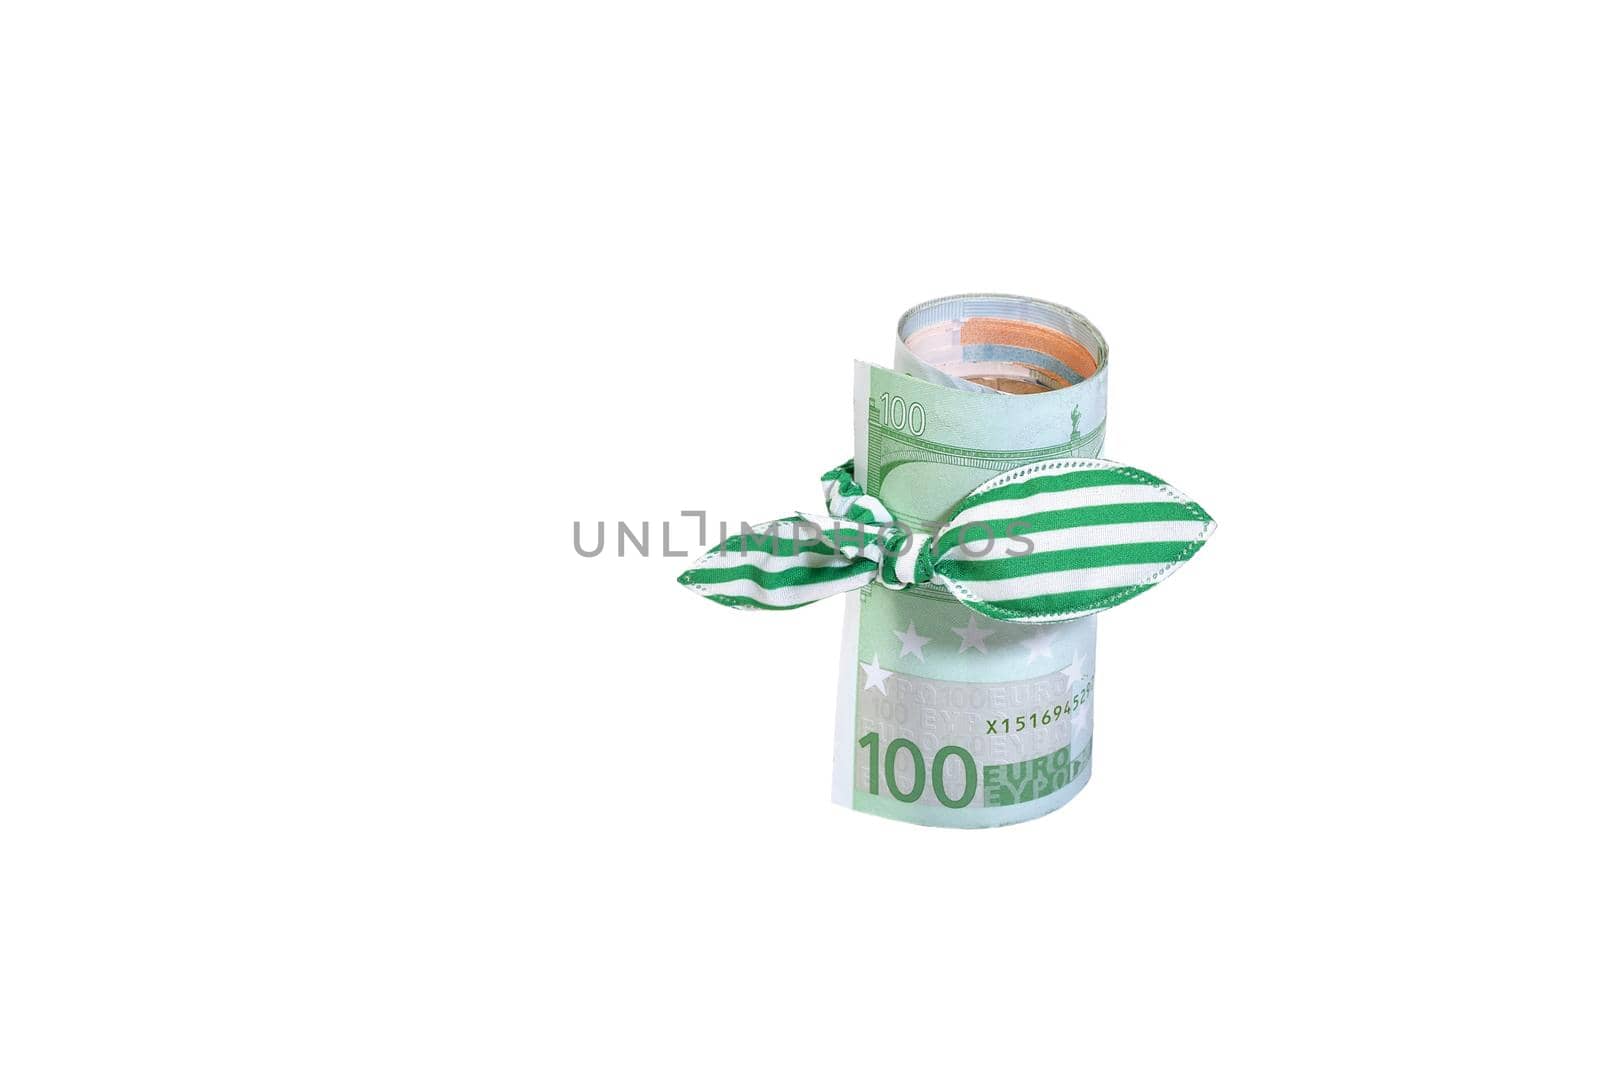 Hundred euros banknote curtailed by a tubule with green bow by Estival